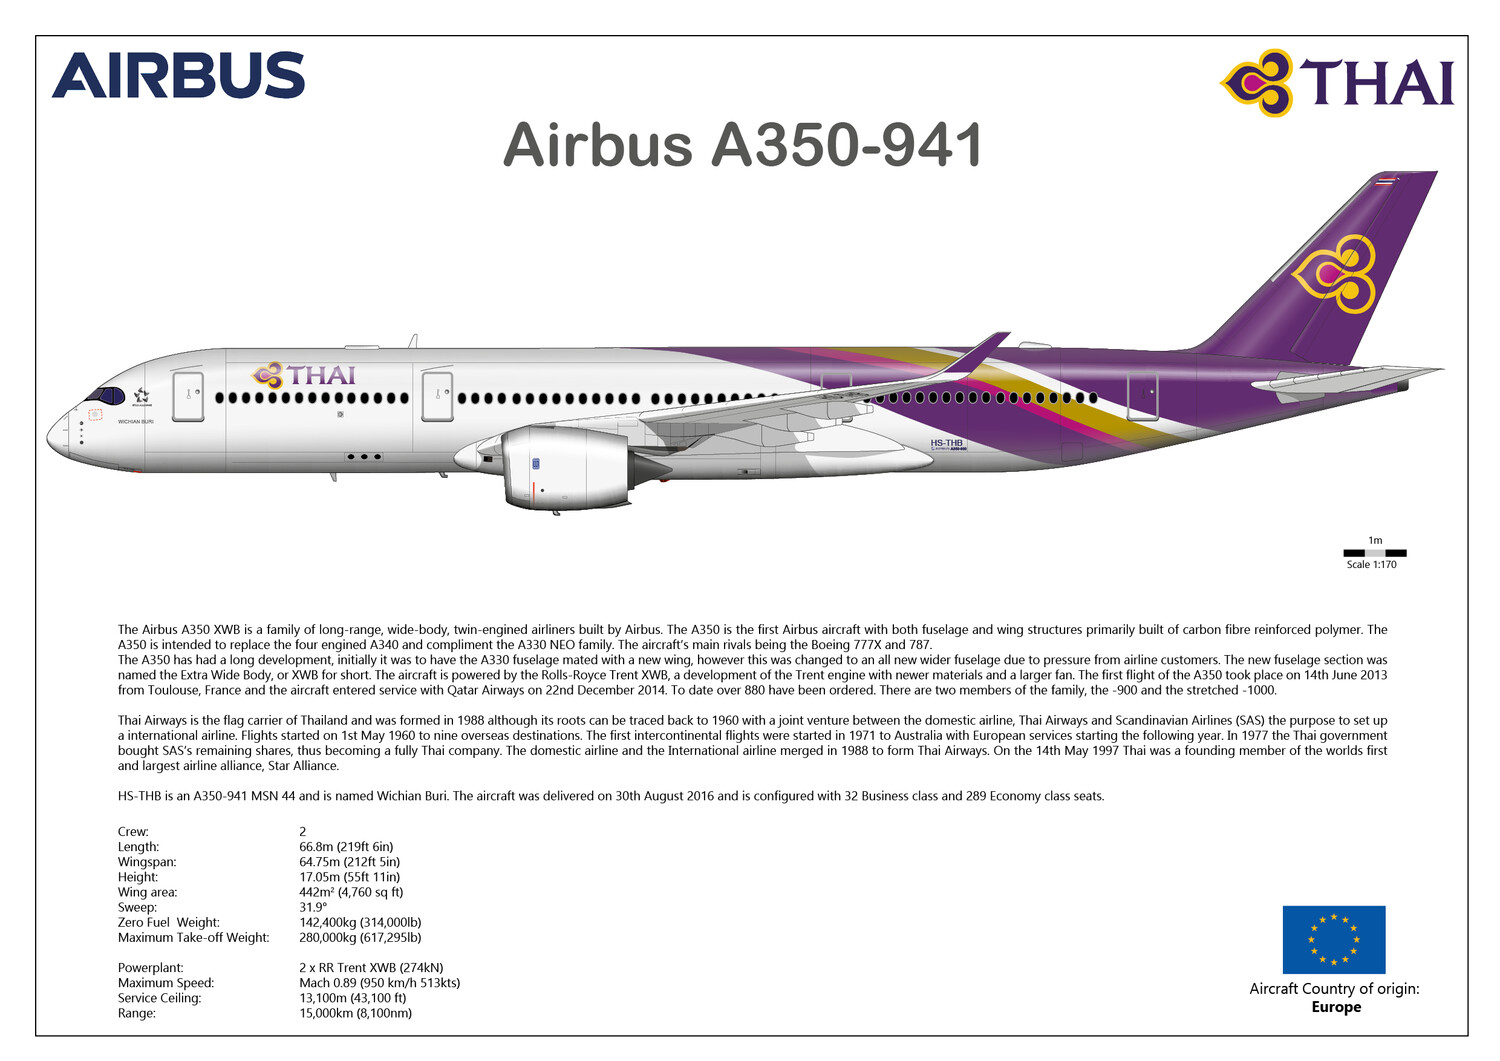 Airbus A350 in Thai Airways livery - Layout B